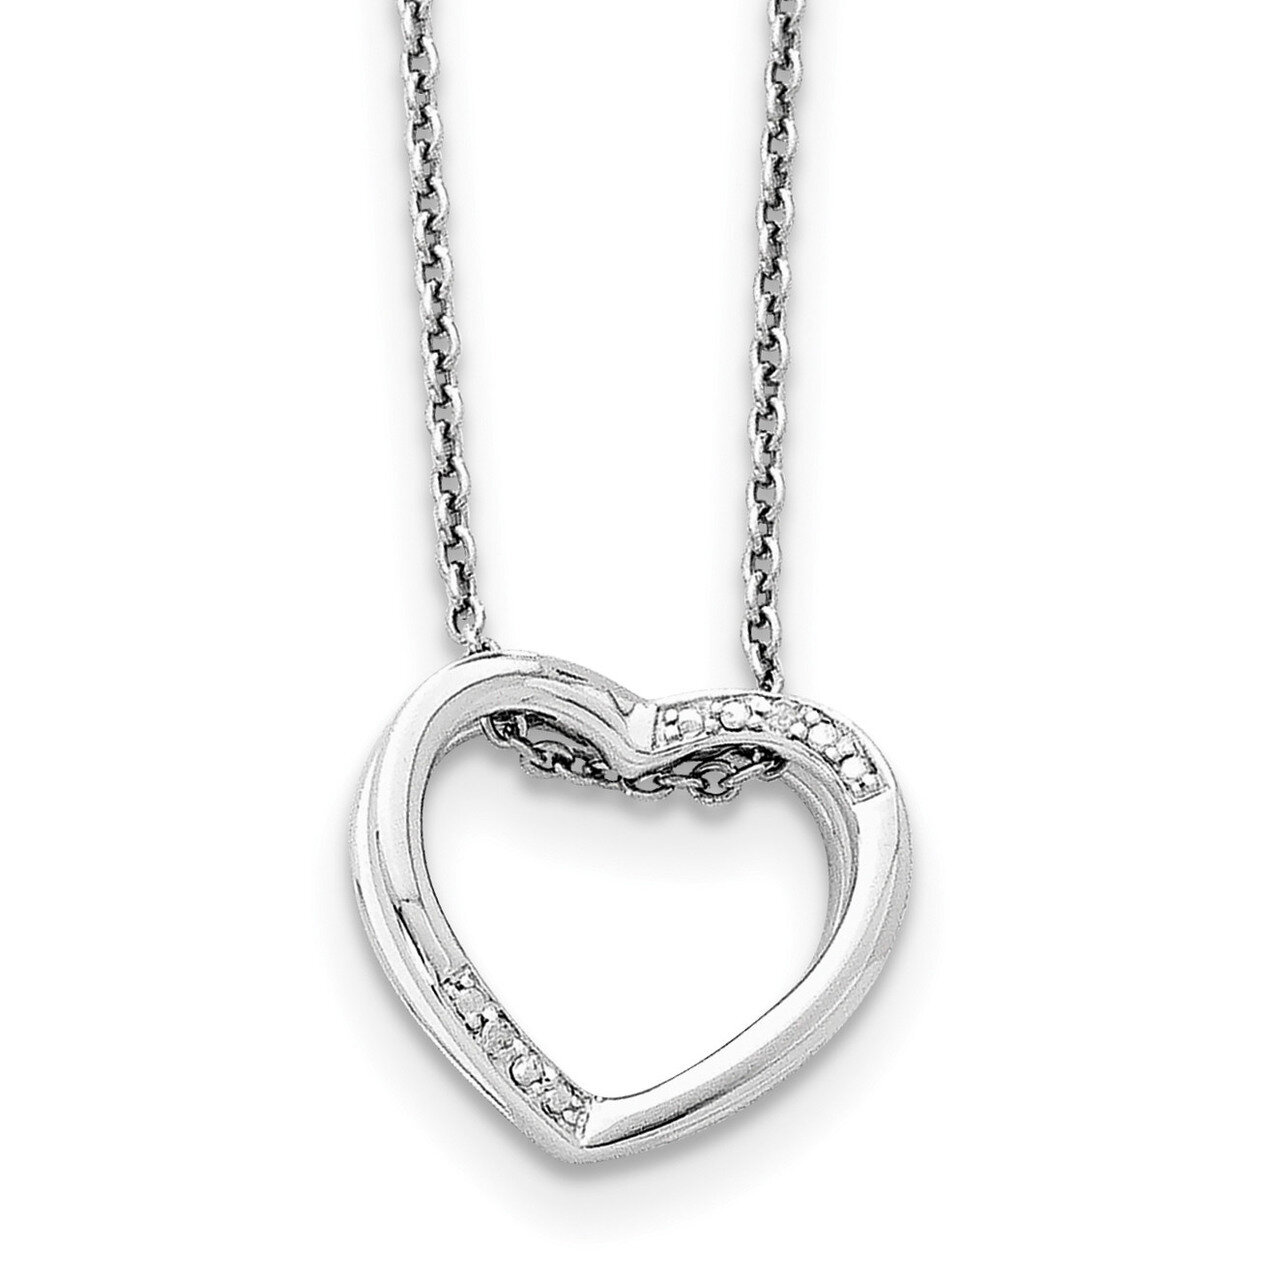 Heart Necklace Diamond Sterling Silver QW312-18